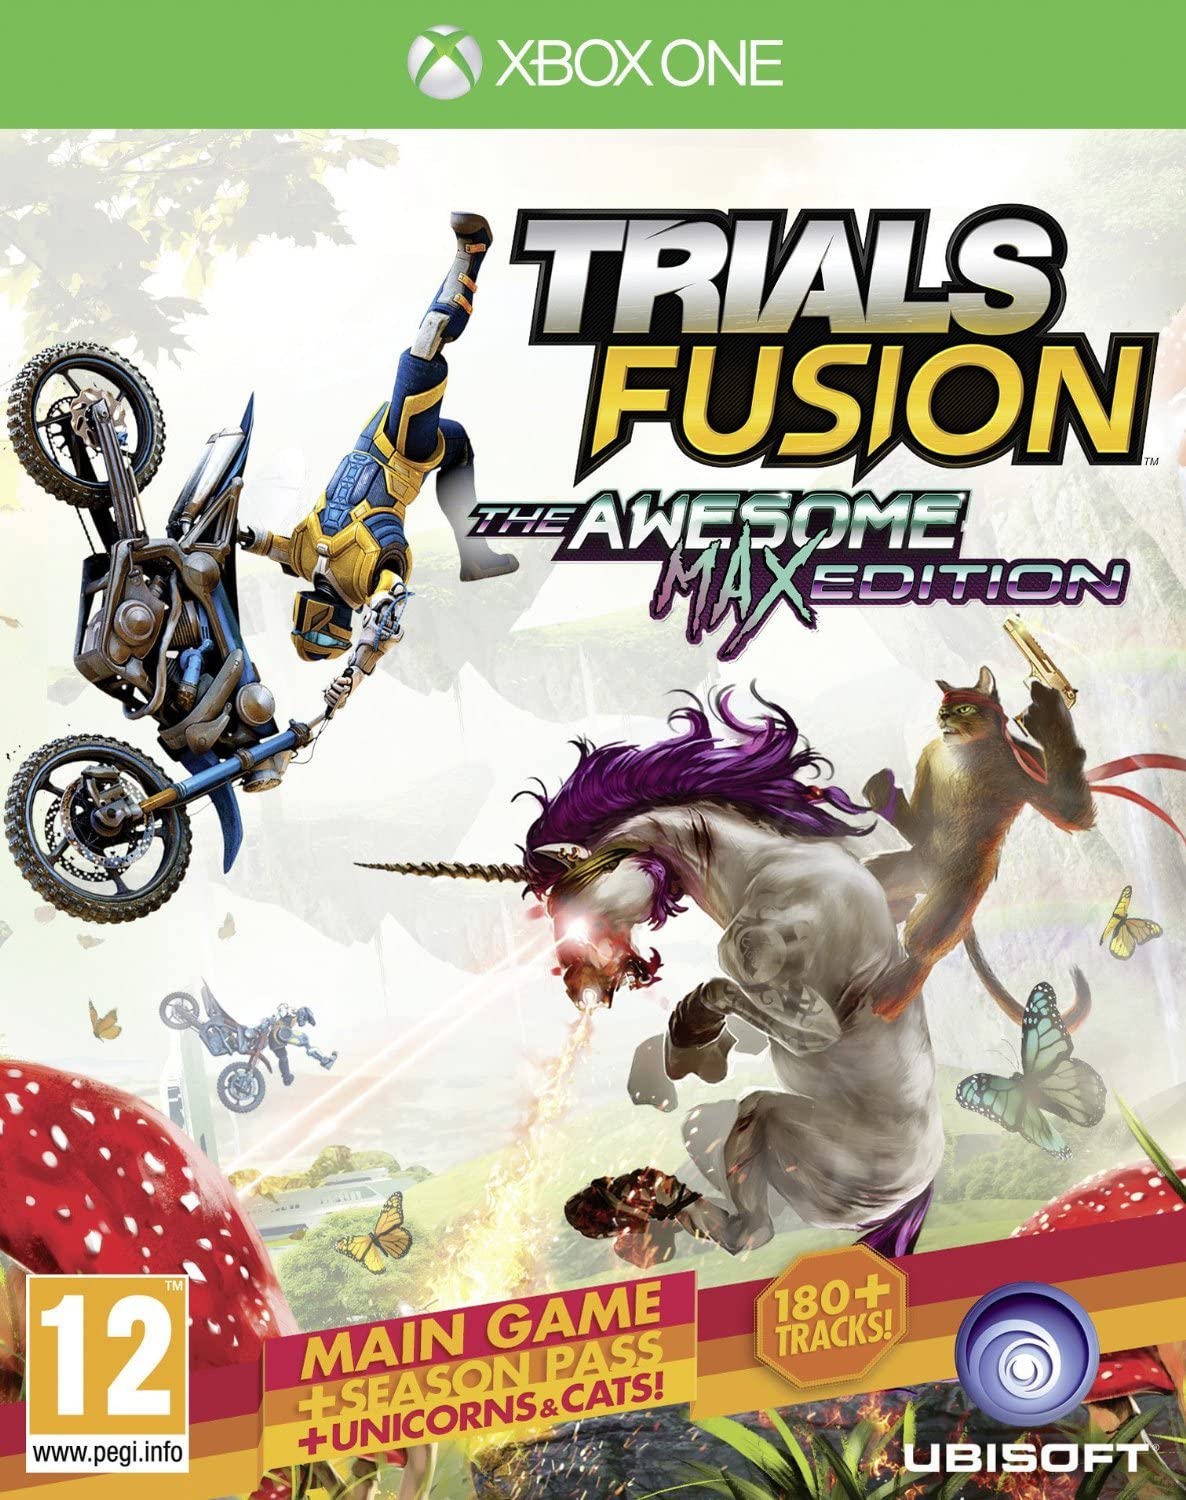 Trials Fusion The Awesome Max Edition Digital Download Key (Xbox One): USA - 